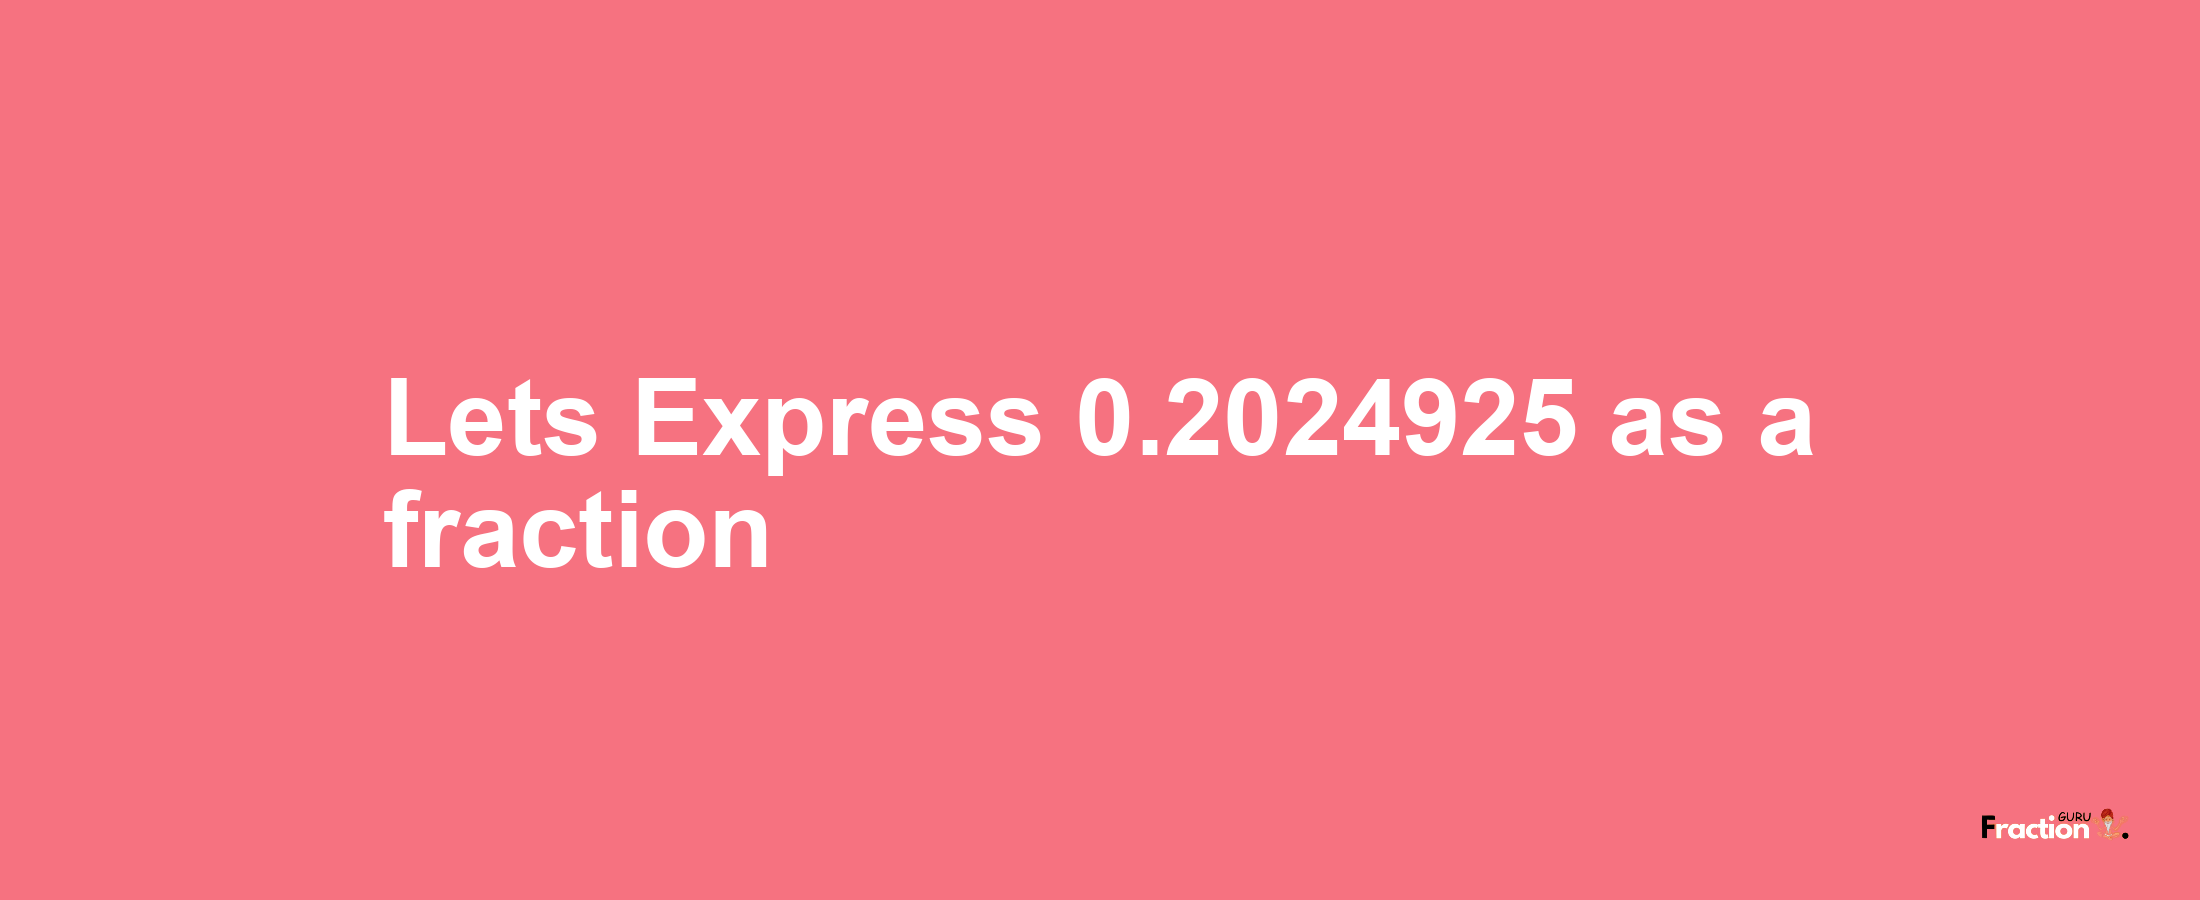 Lets Express 0.2024925 as afraction